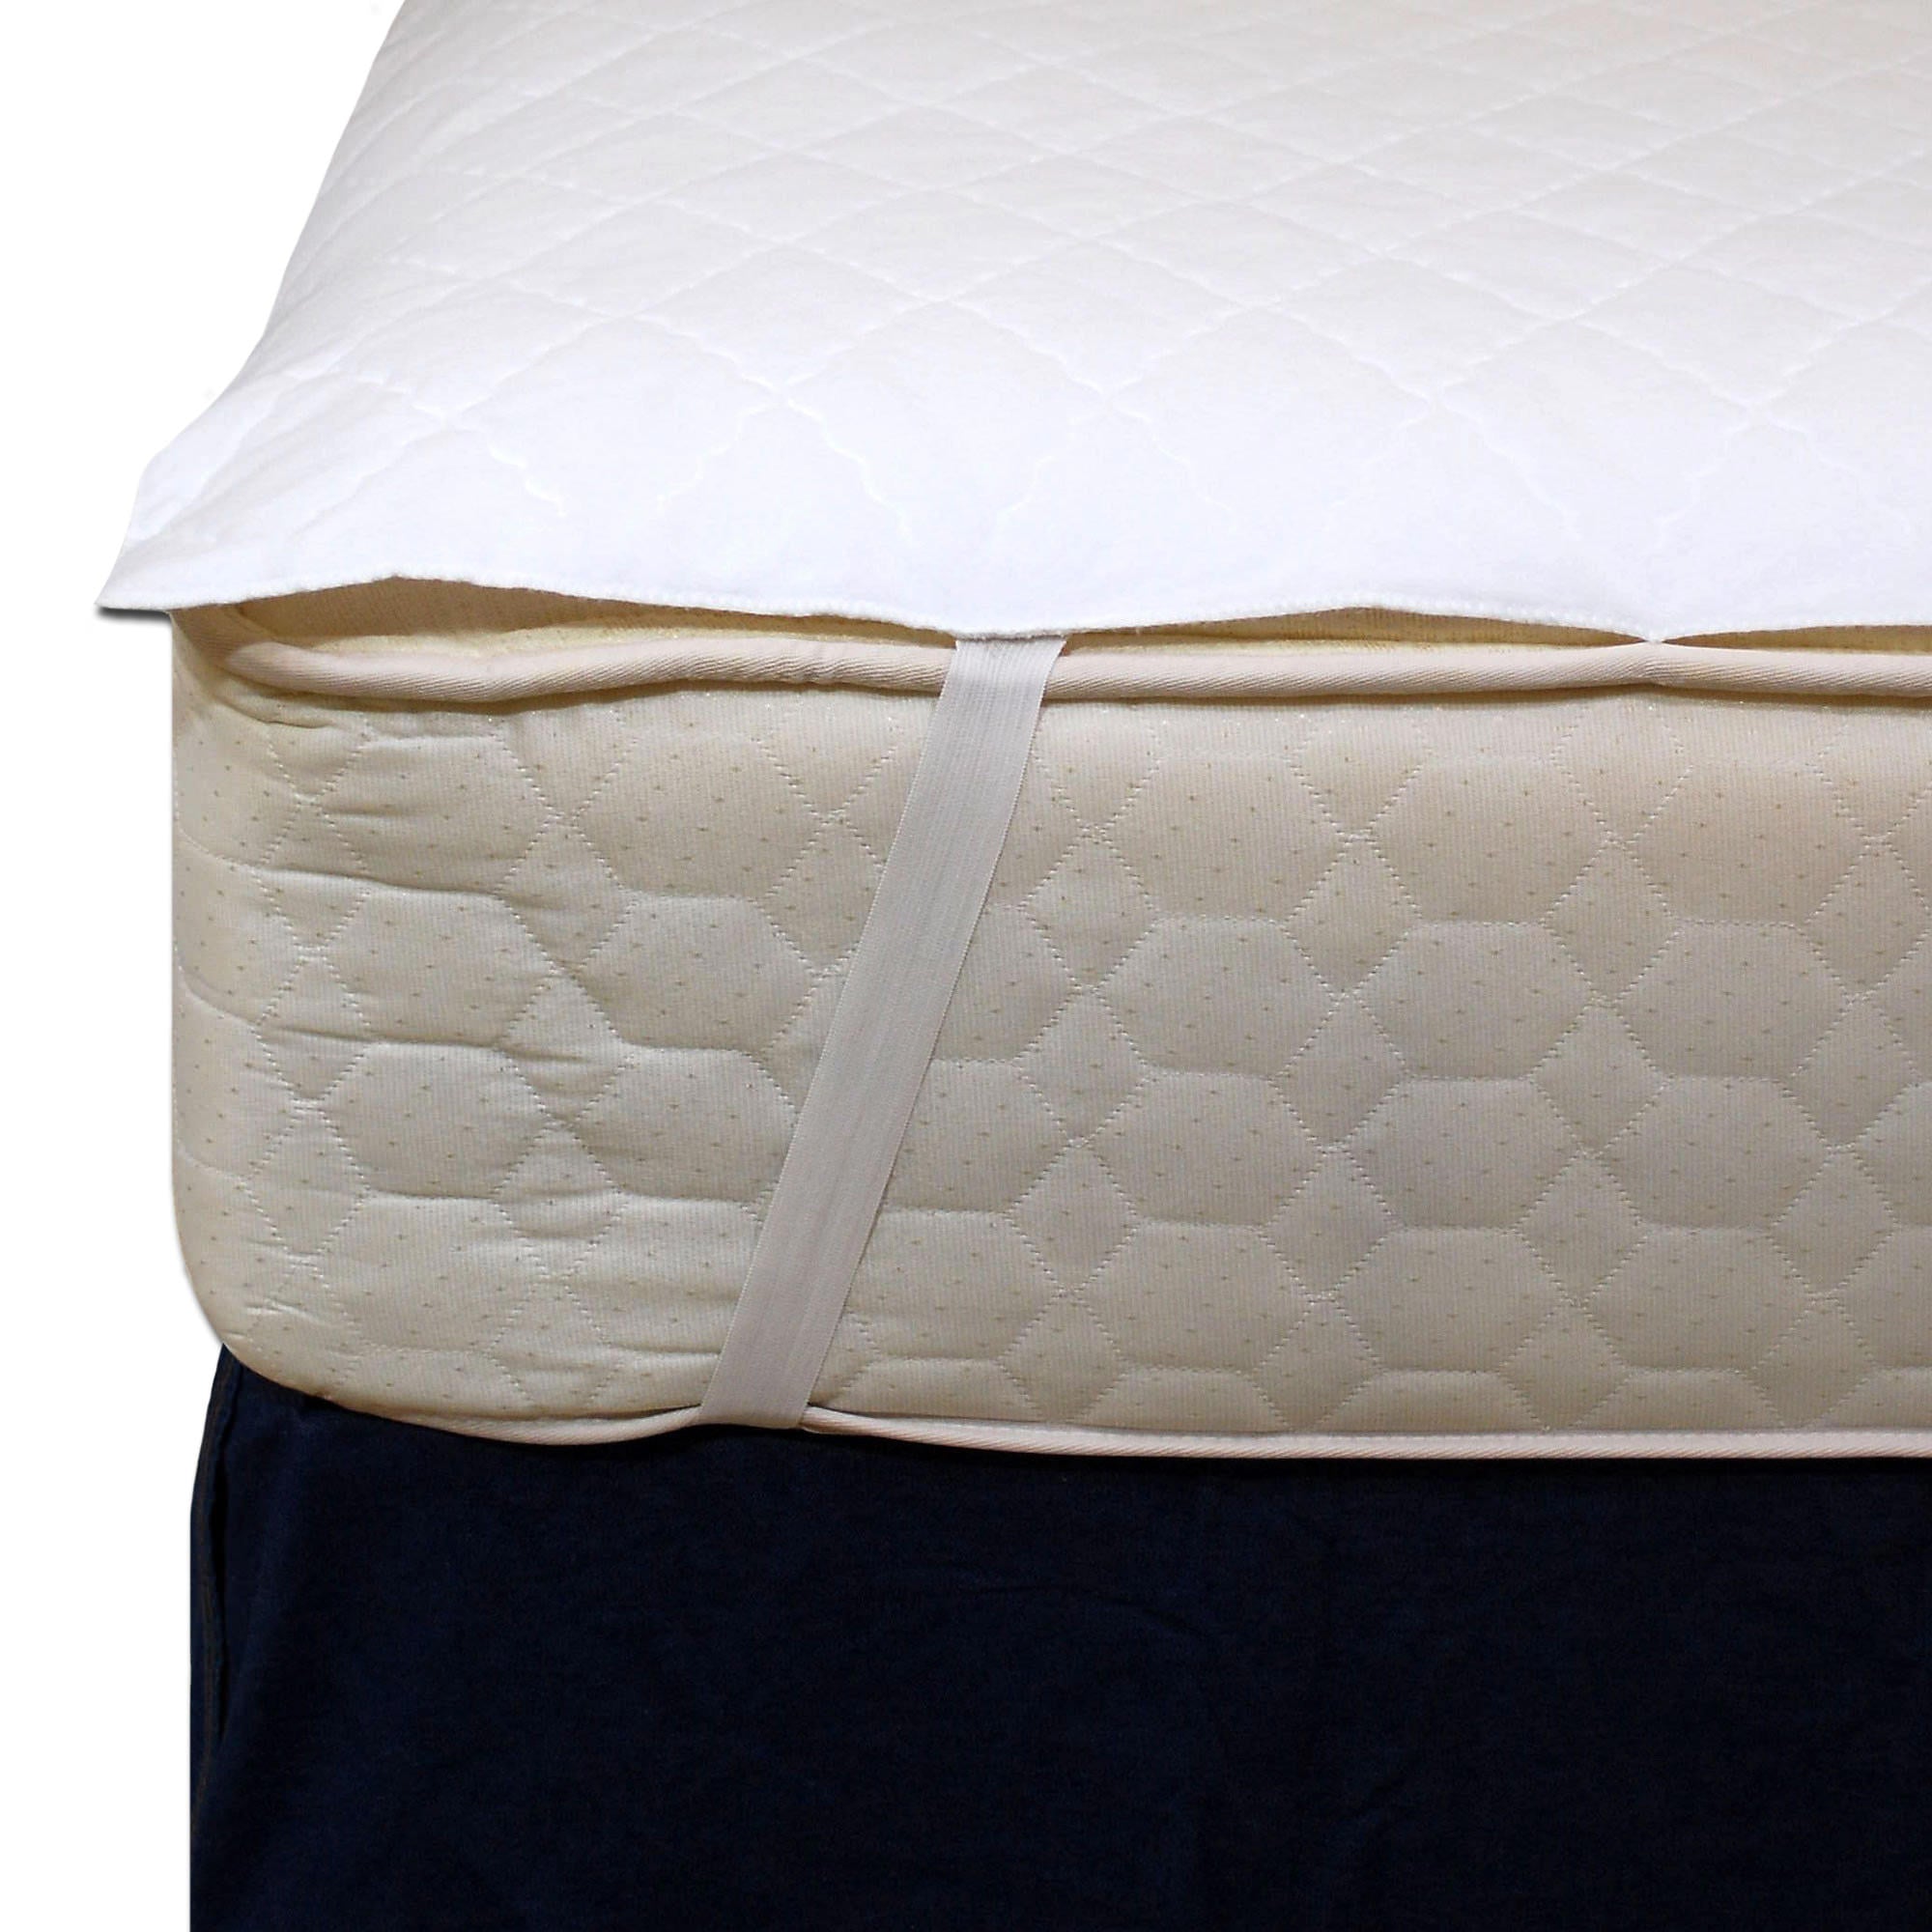 Waterproof Mattress Protector with Anchor Bands